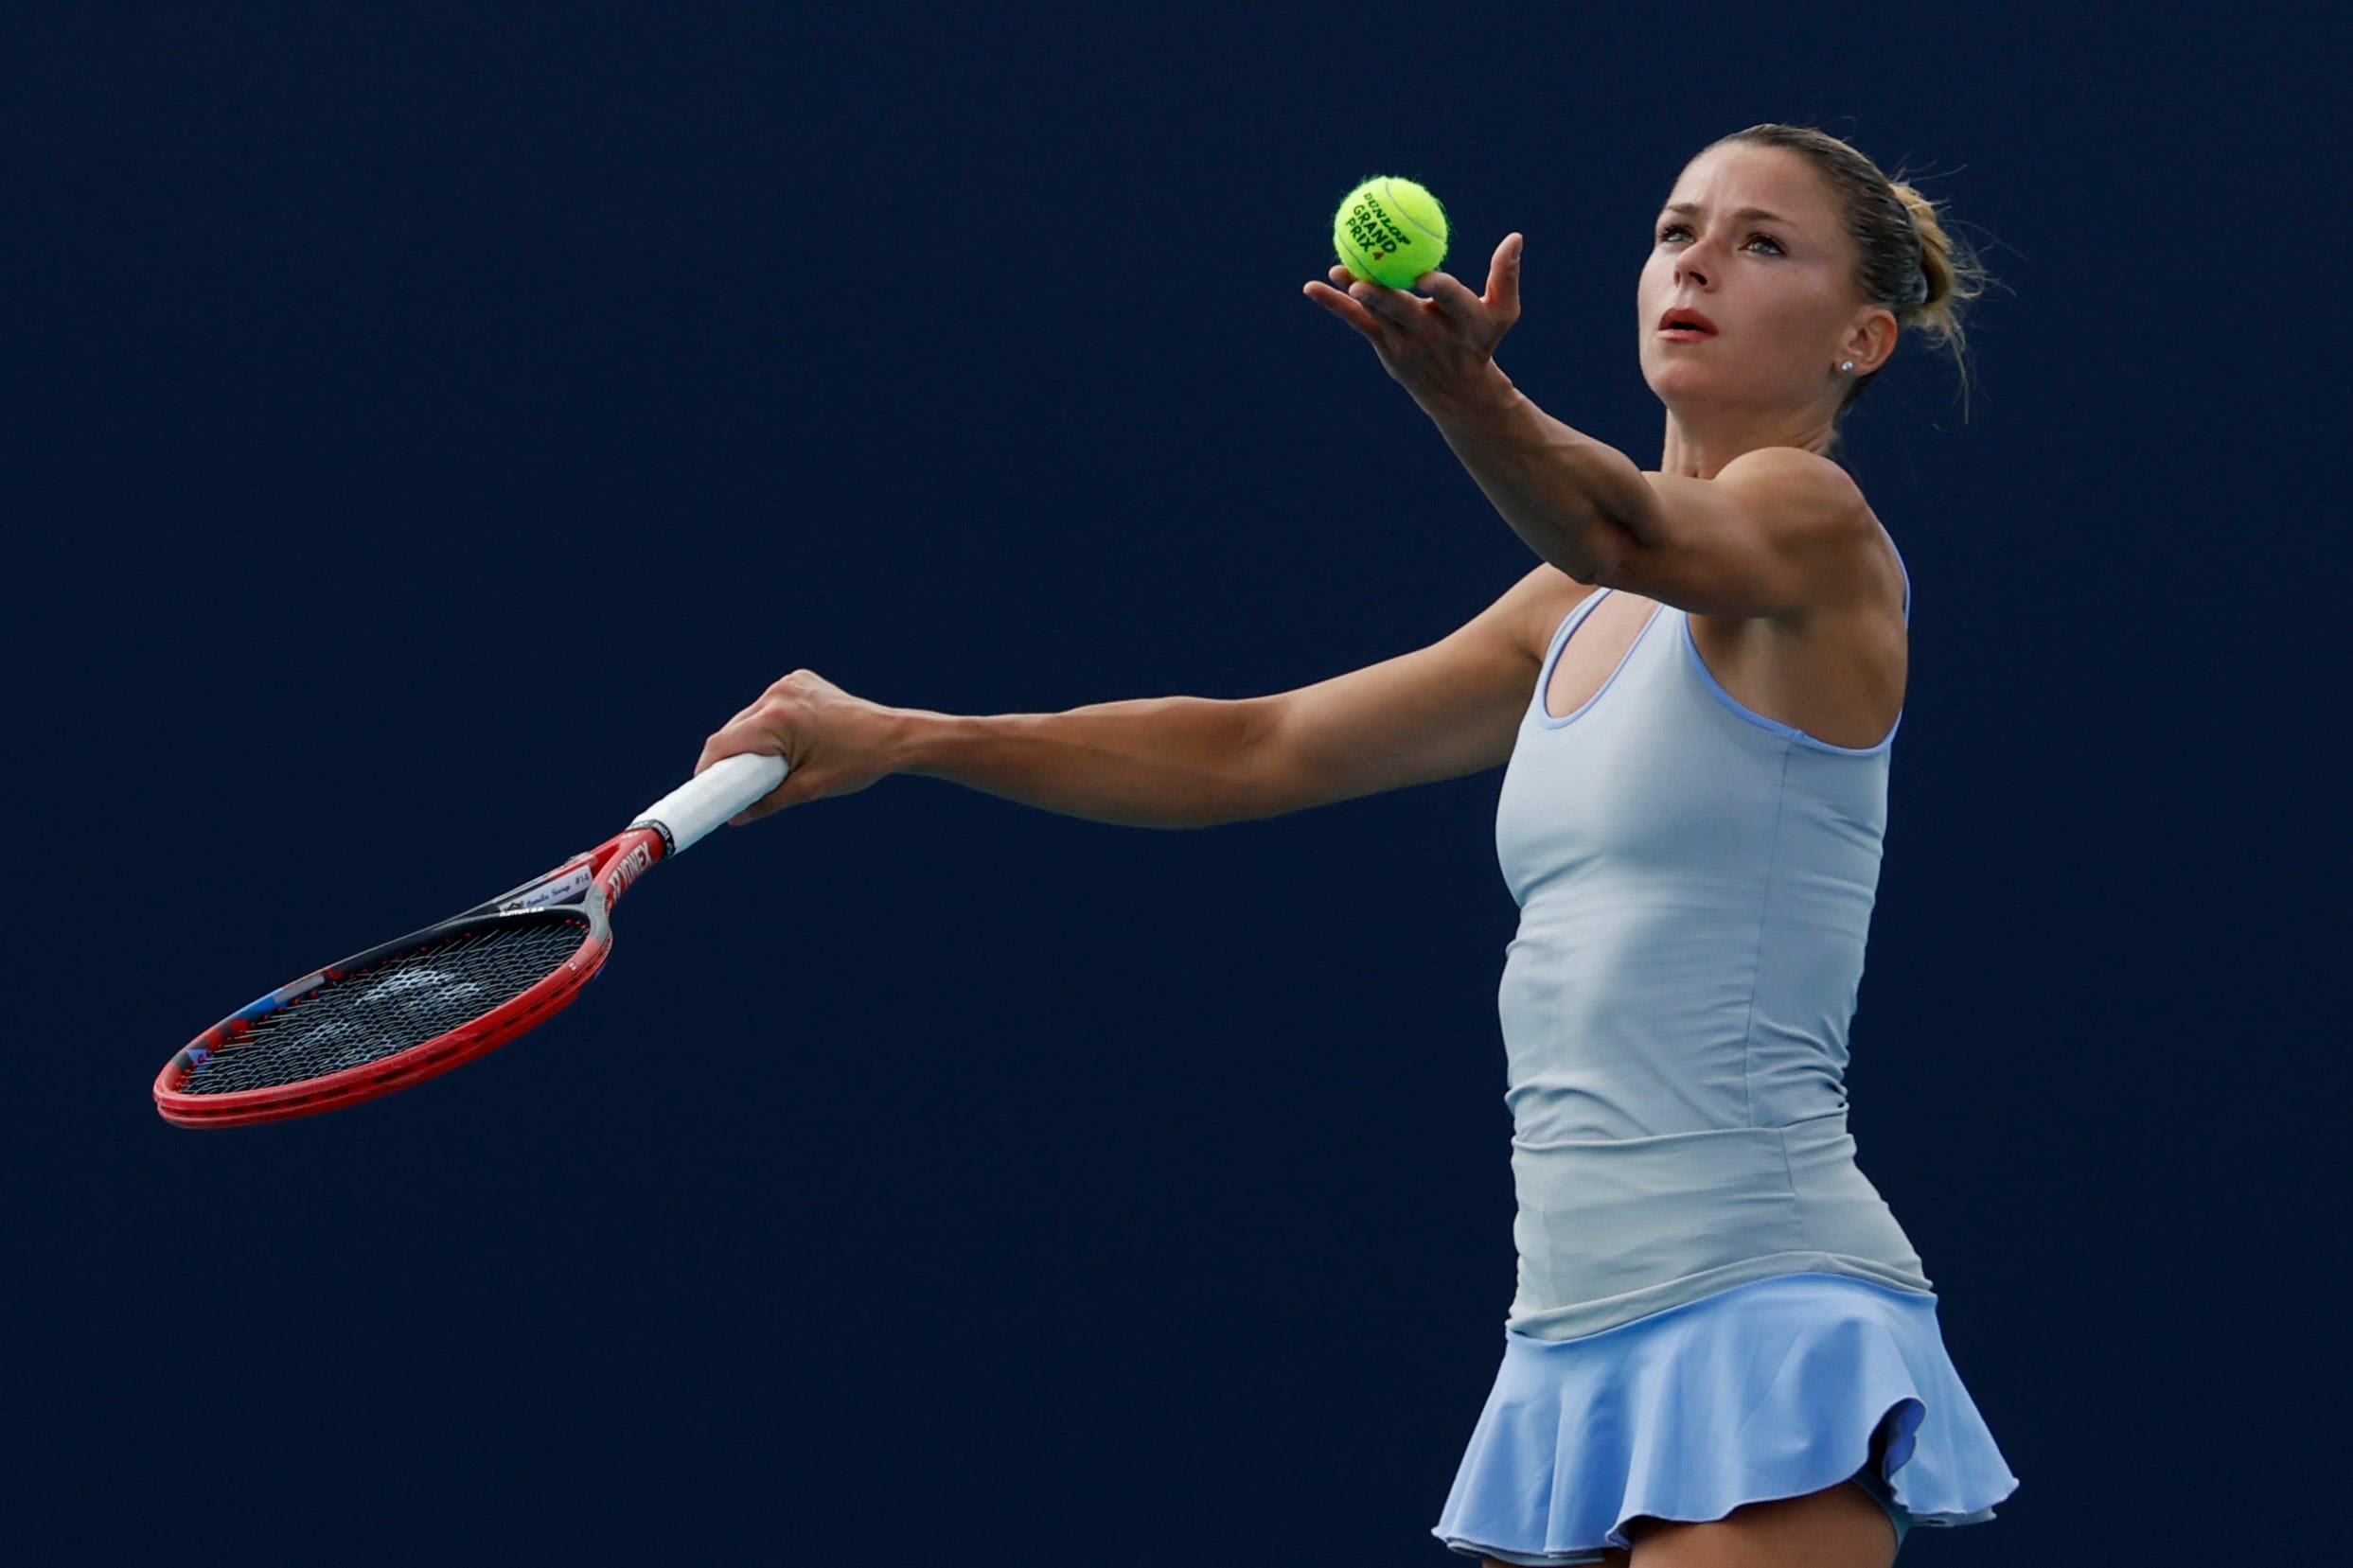 Recently retired tennis player Camila Giorgi on the run from Italian tax authorities, per report